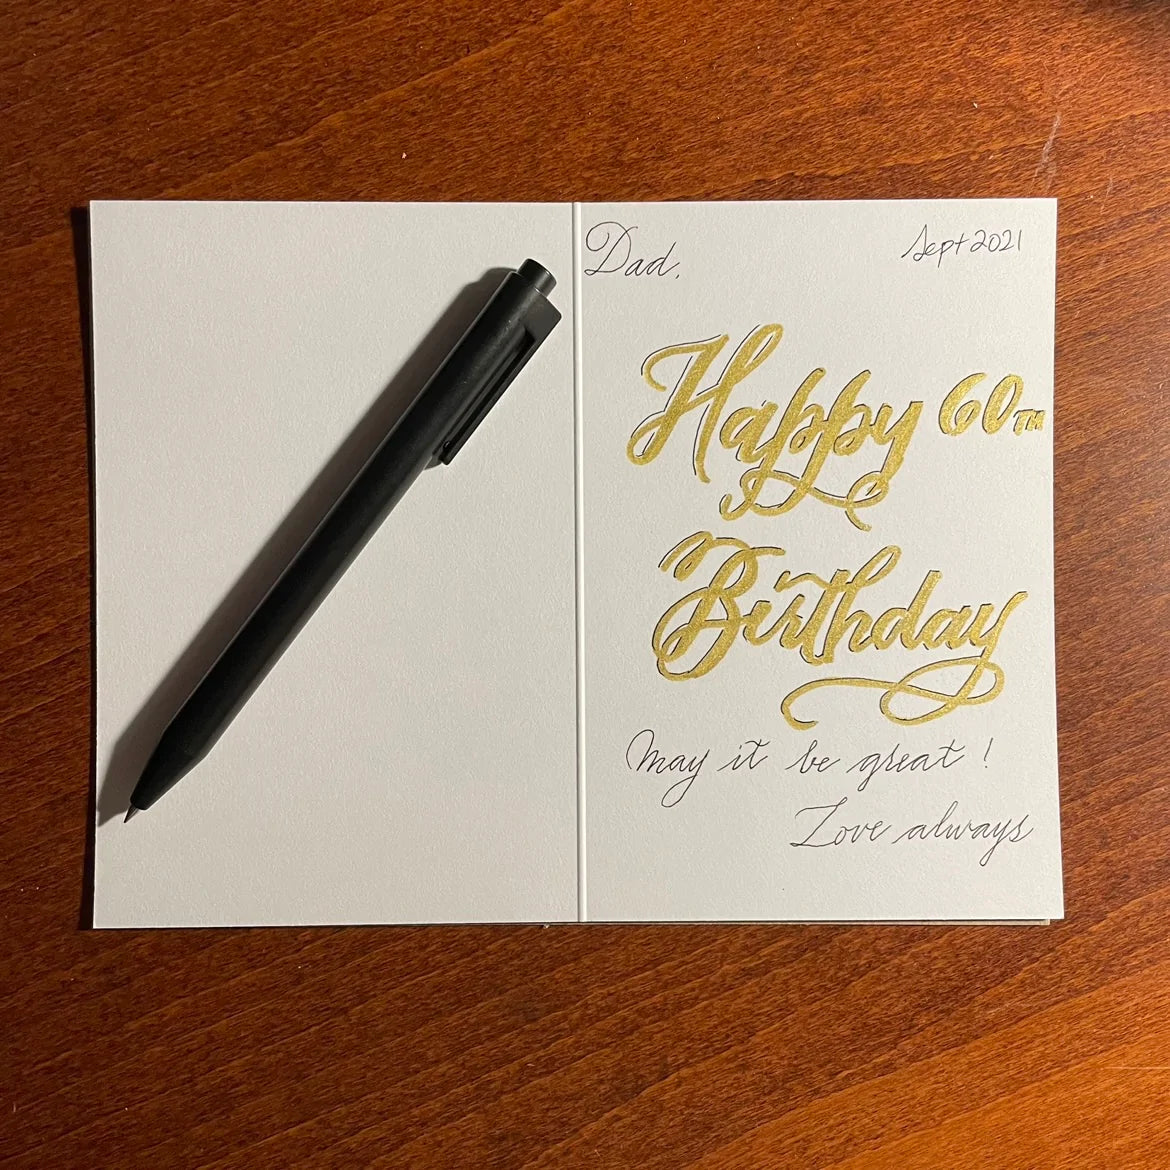 "Happy 60th Birthday, may it be great!" | Add a note in calligraphy to any greeting card - Custom services by Nibs and Scripts